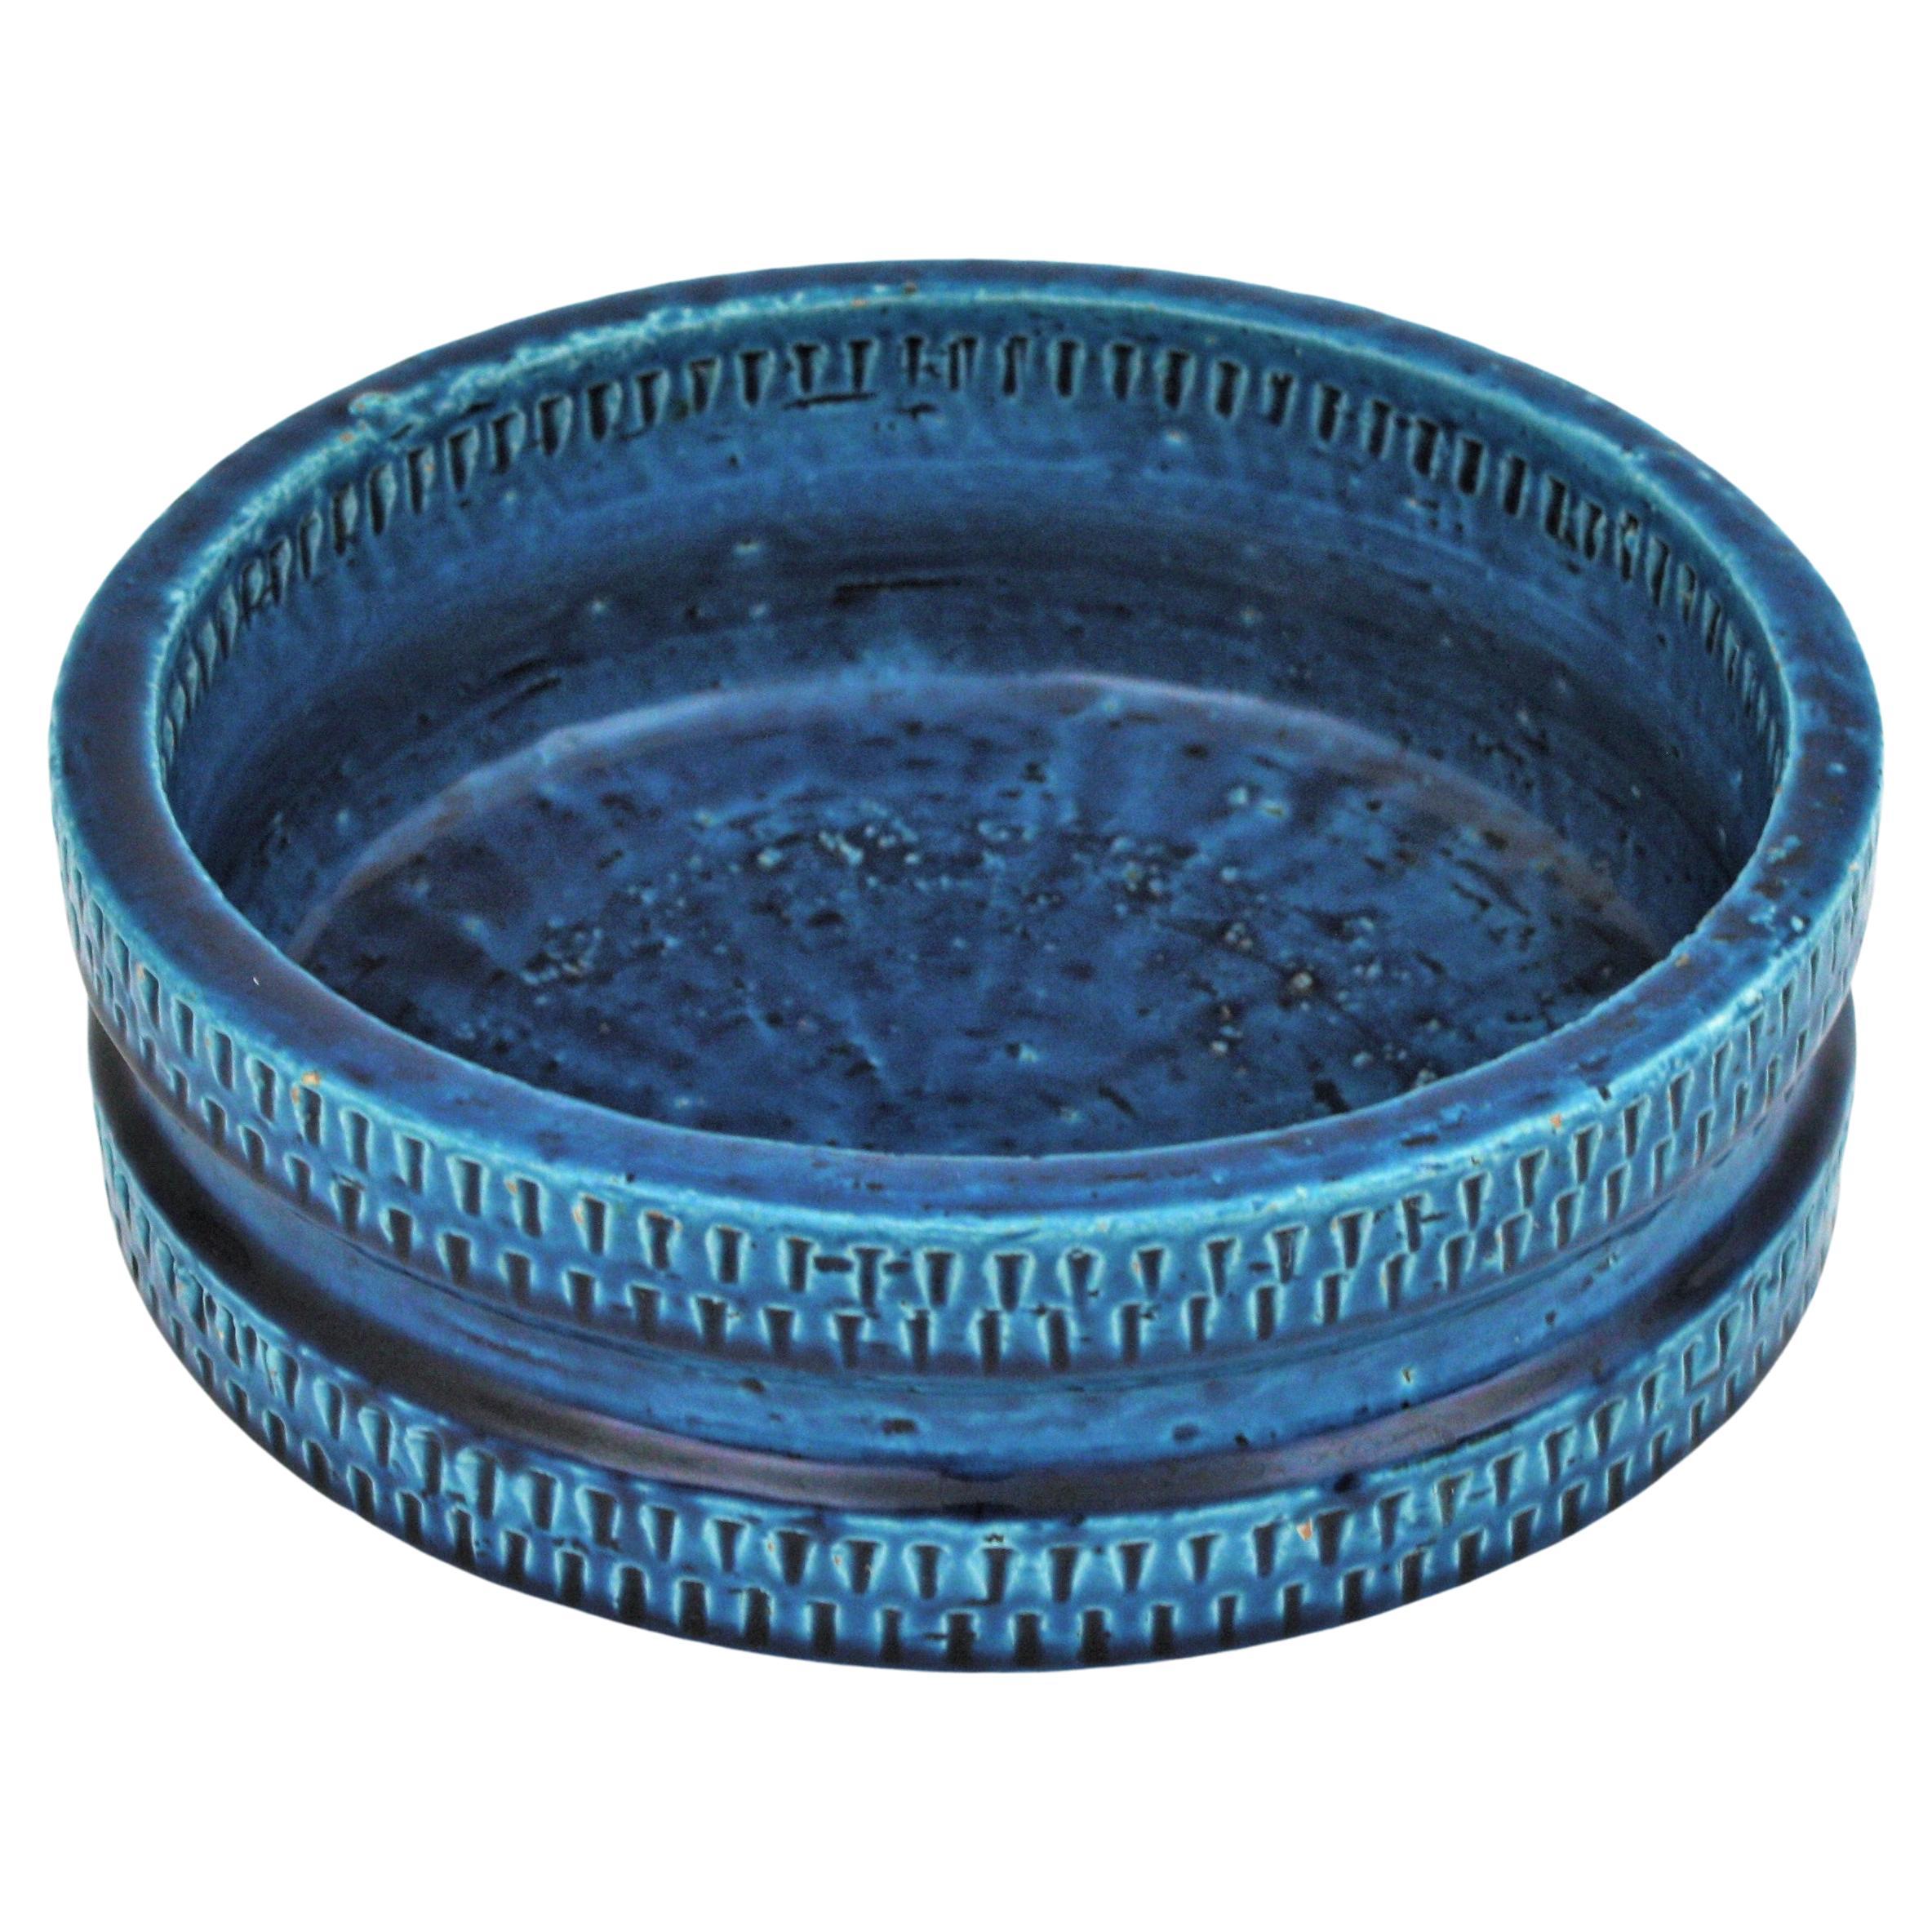 Large scale Mid-Century Modern blue glazed ceramic (Rimini Blu) round bowl /centerpiece, manufactured by S.I.C Ceramiche Italy, 1950-1960s.
It has reminiscences in those designs from Aldo Londi and Bitossi. 
Handcrafted in Italy with hand carved